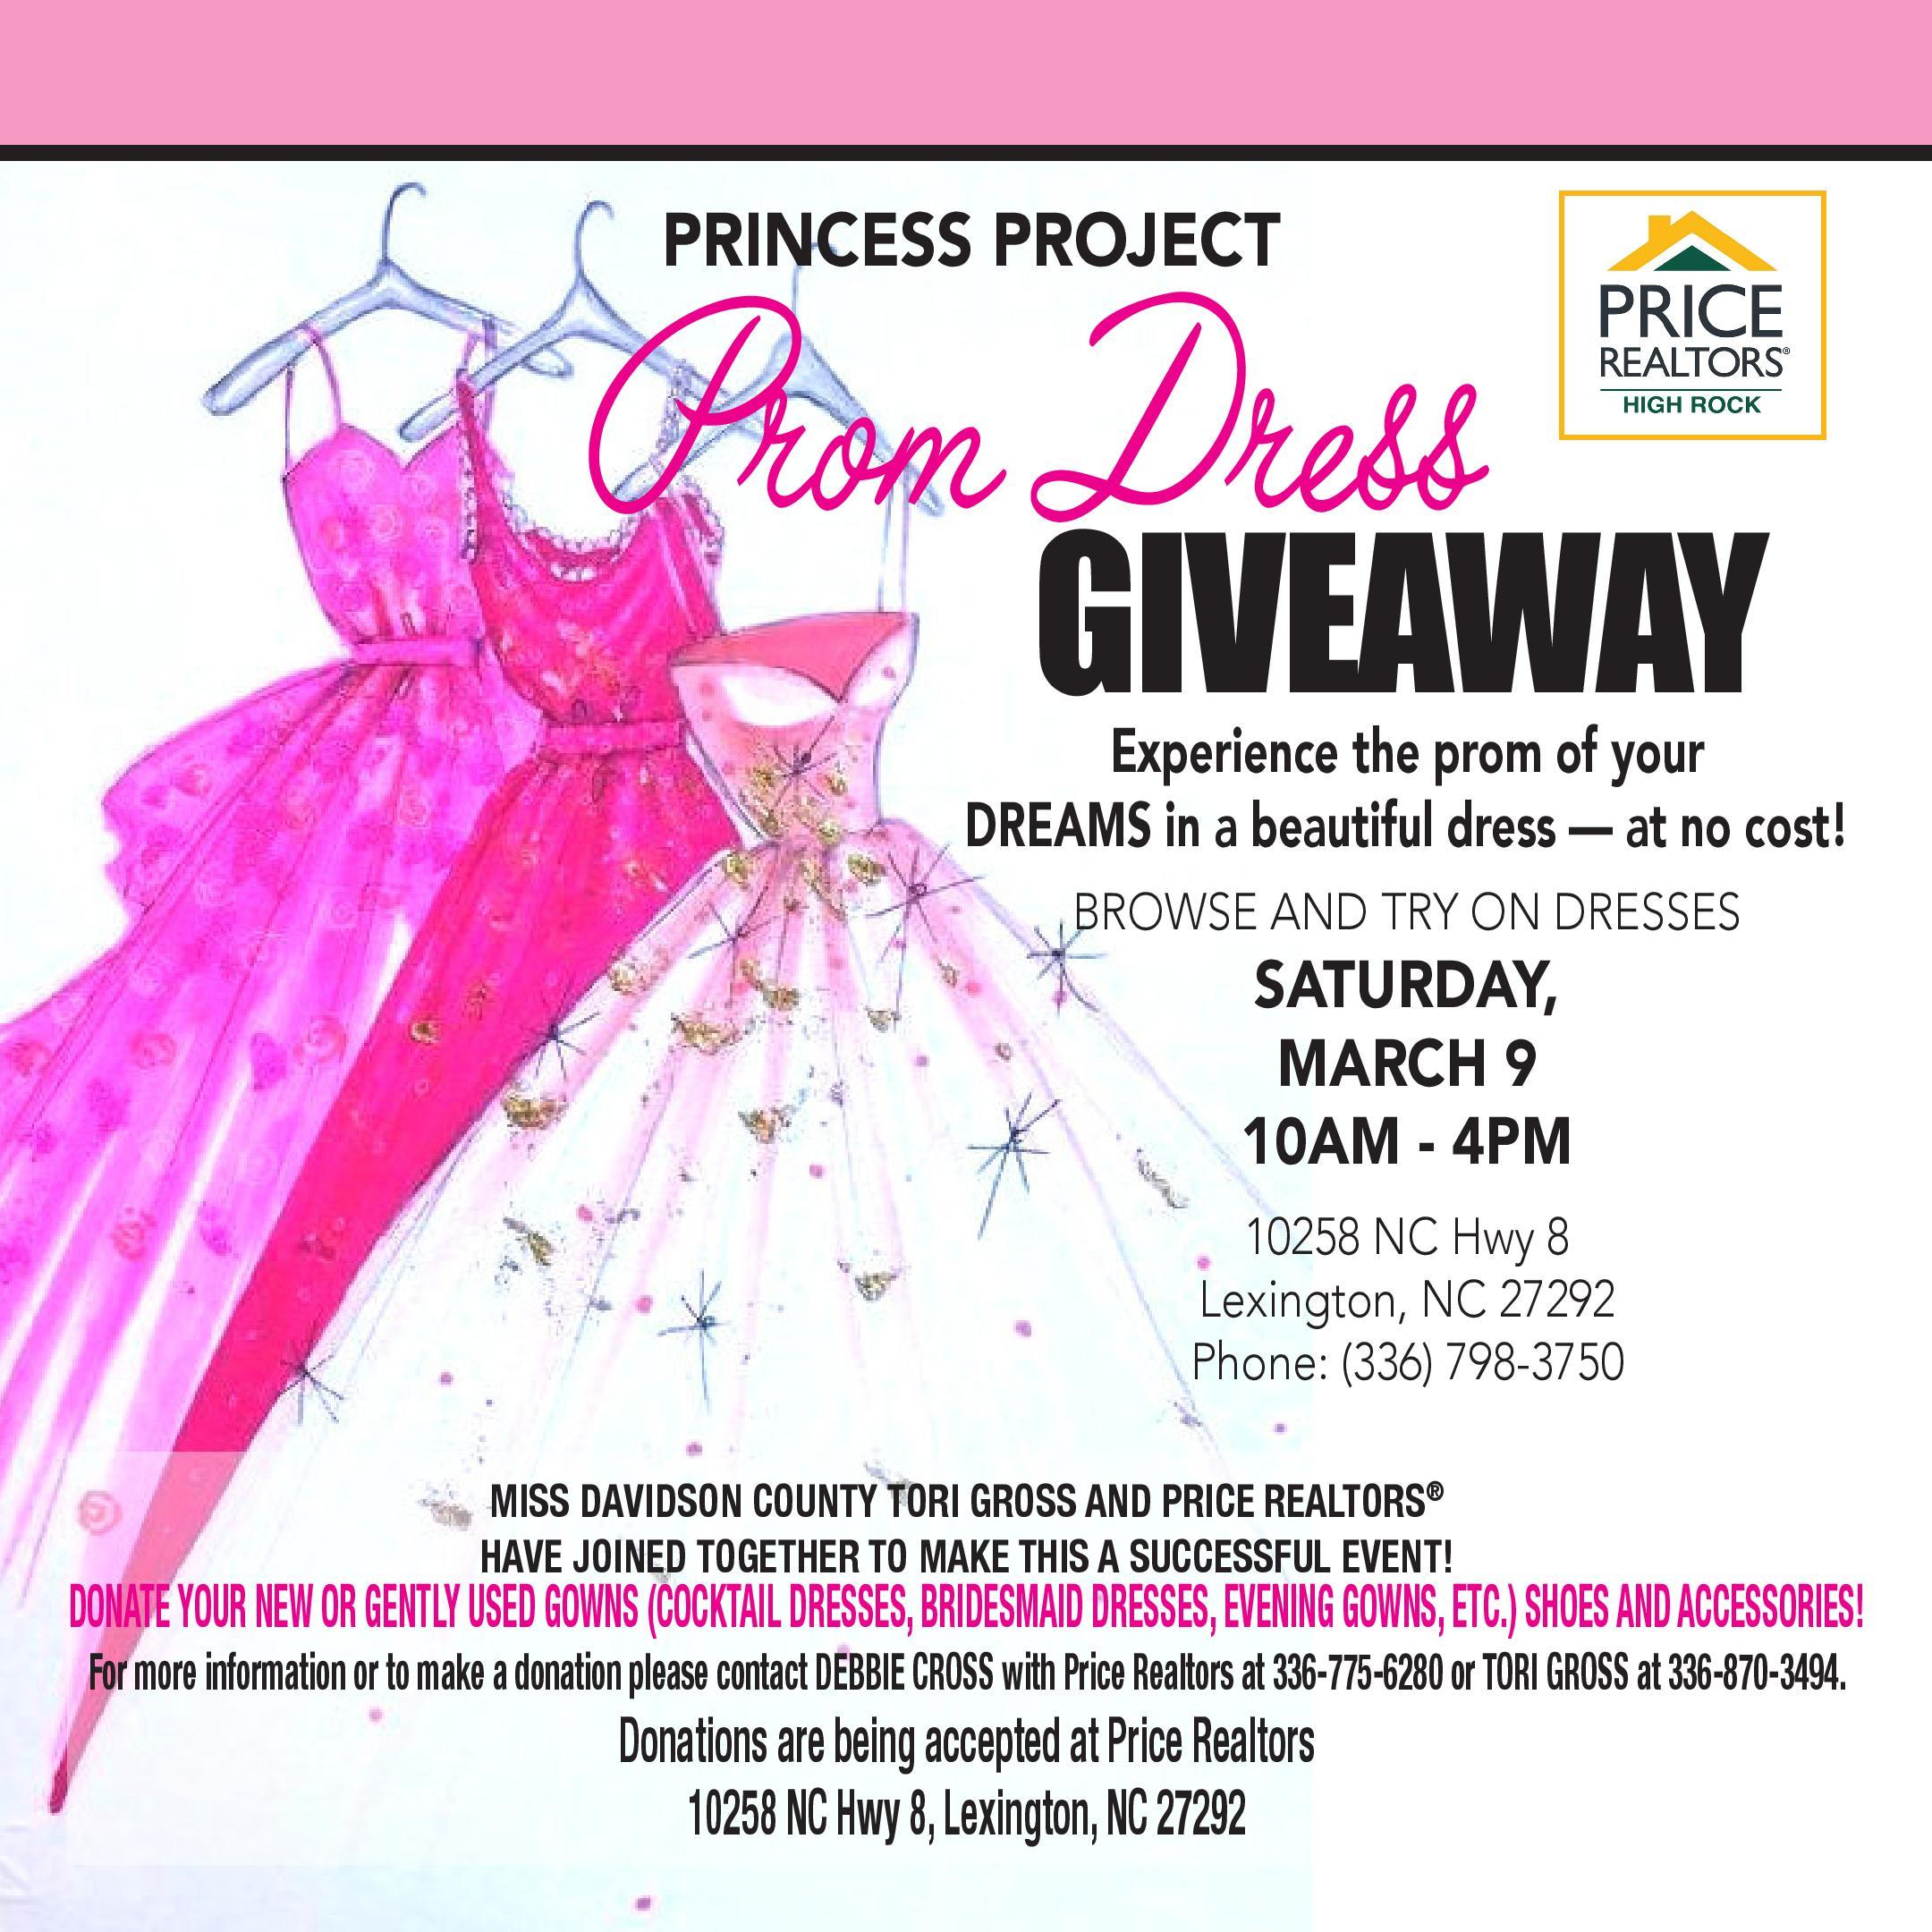 Prom Dress Giveaway Saturday March 9, 10 AM - 4 PM at 10258 NC Hwy 8 Lexington, NC 27292 Phone: (336) 798-3750